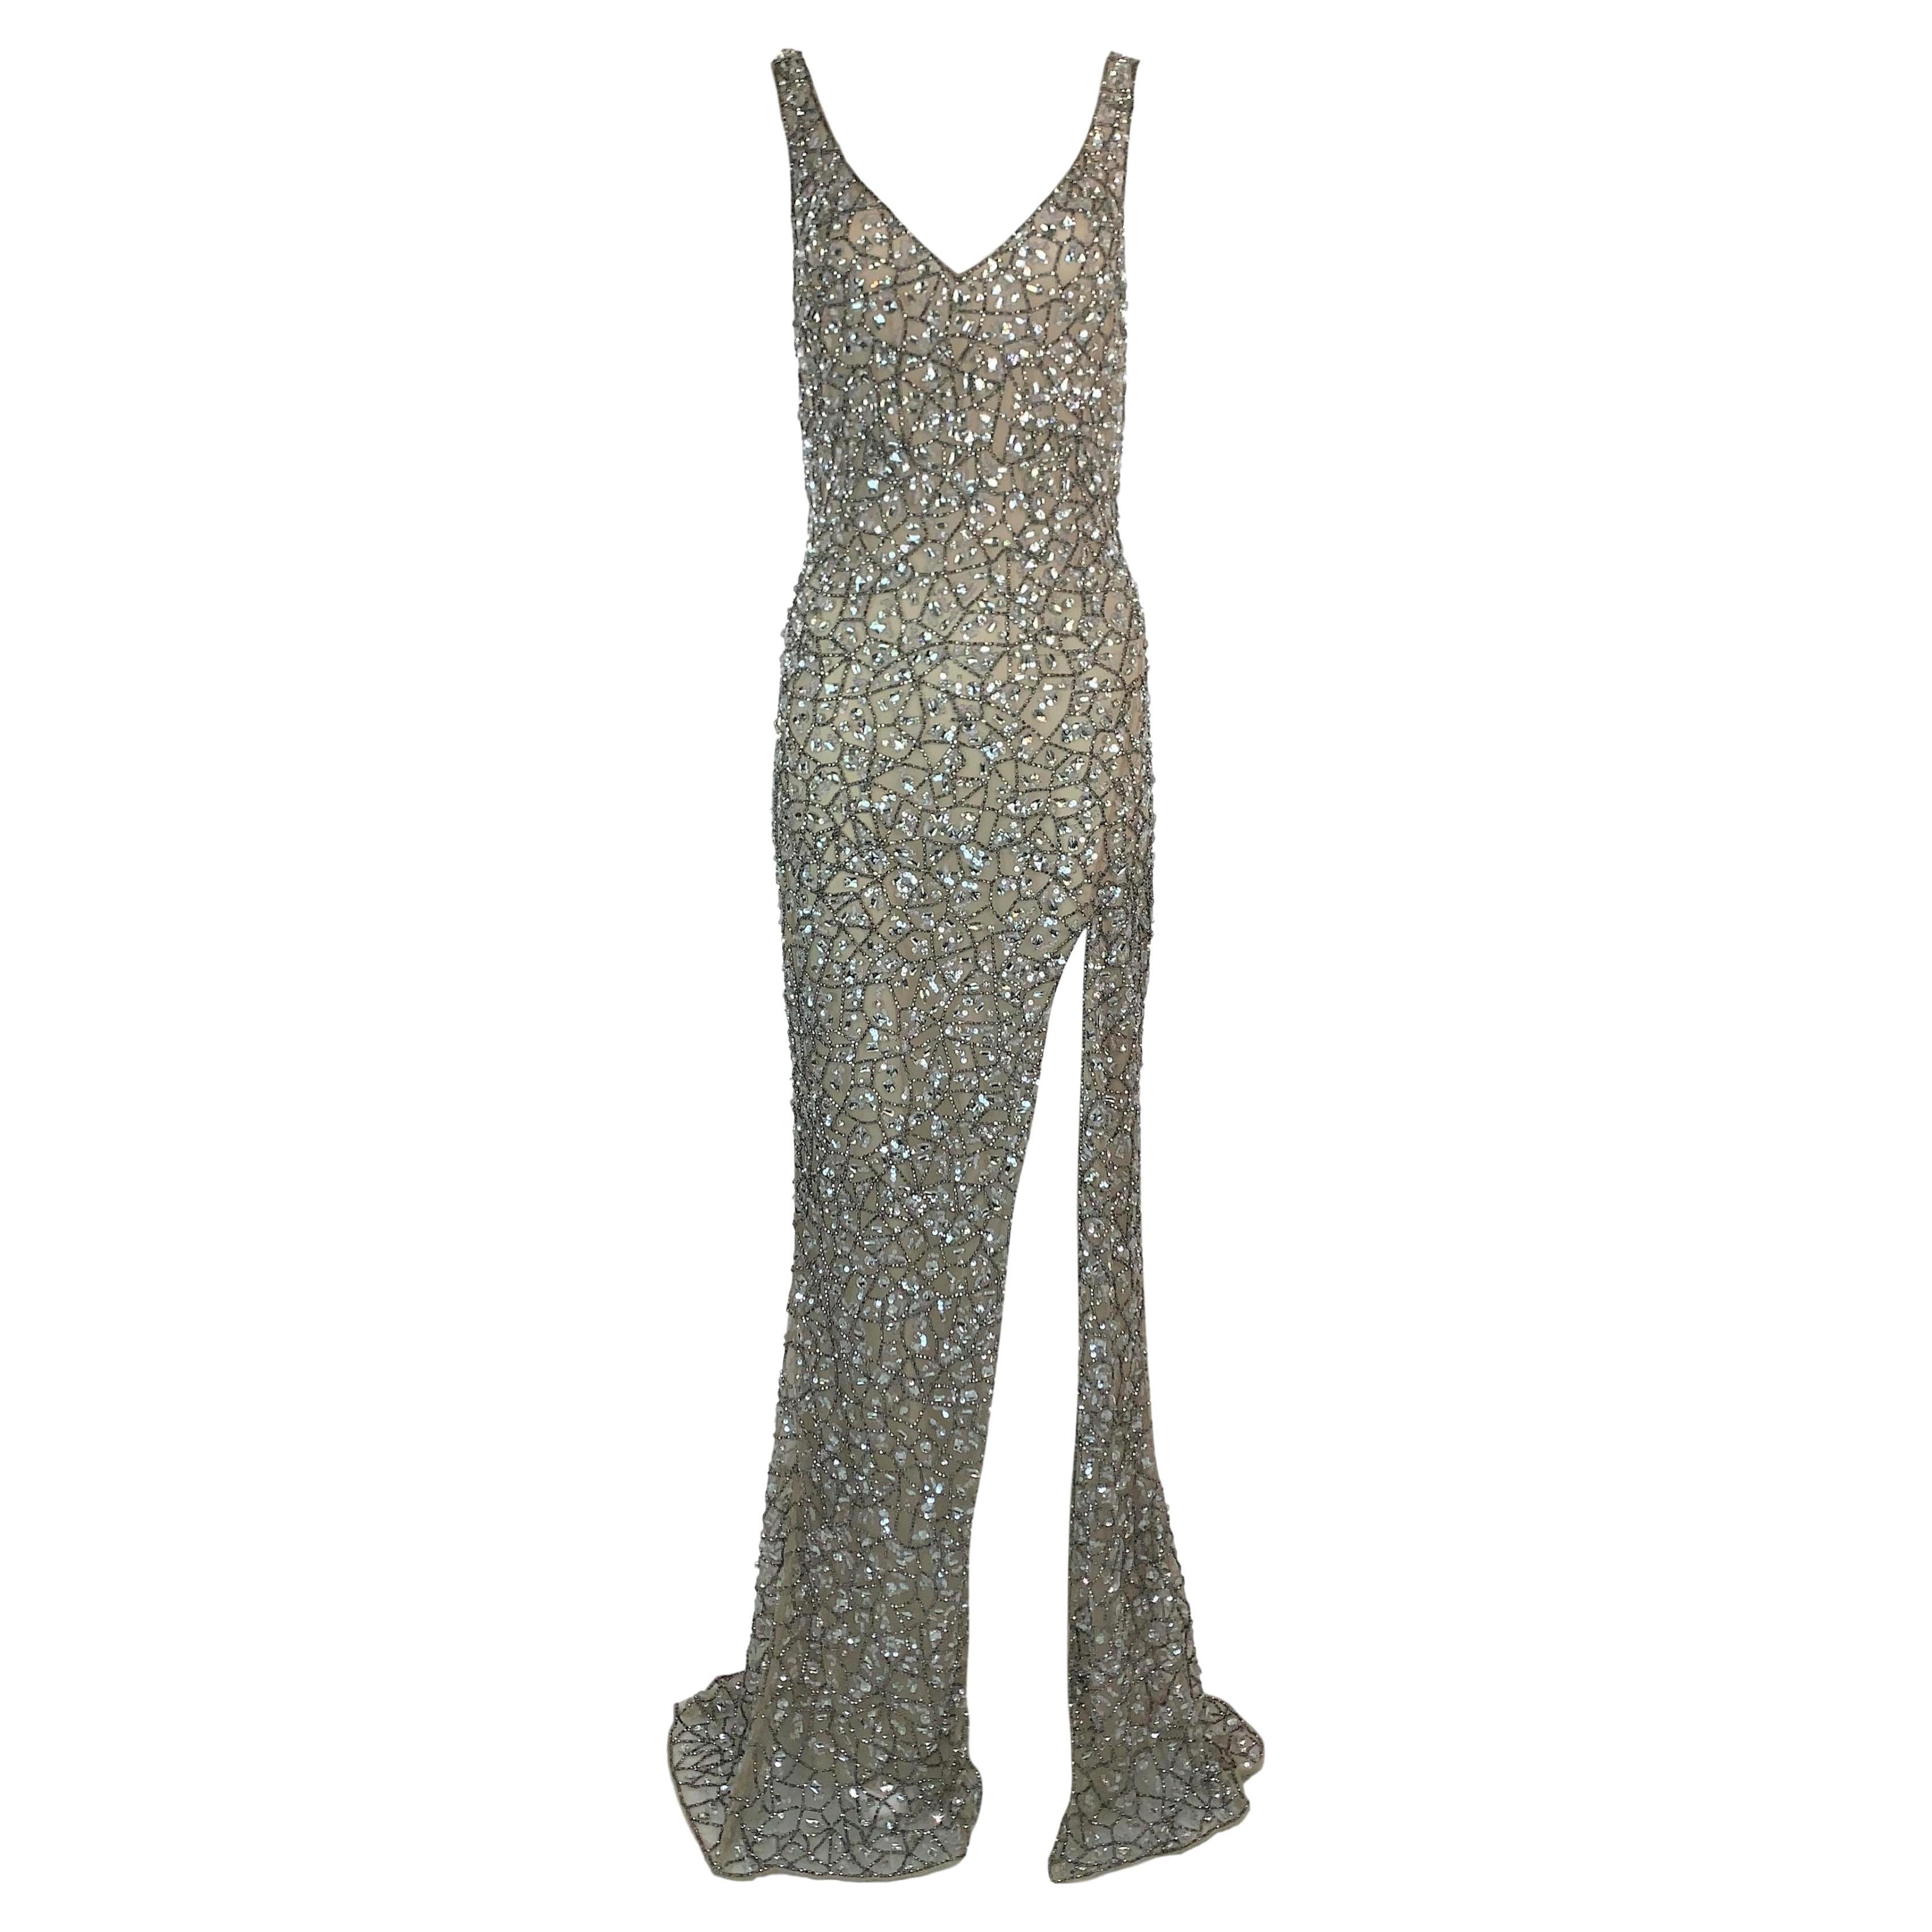 S/S 2019 Roberto Cavalli Plunging Crystal Embellished High Slit Gown Dress